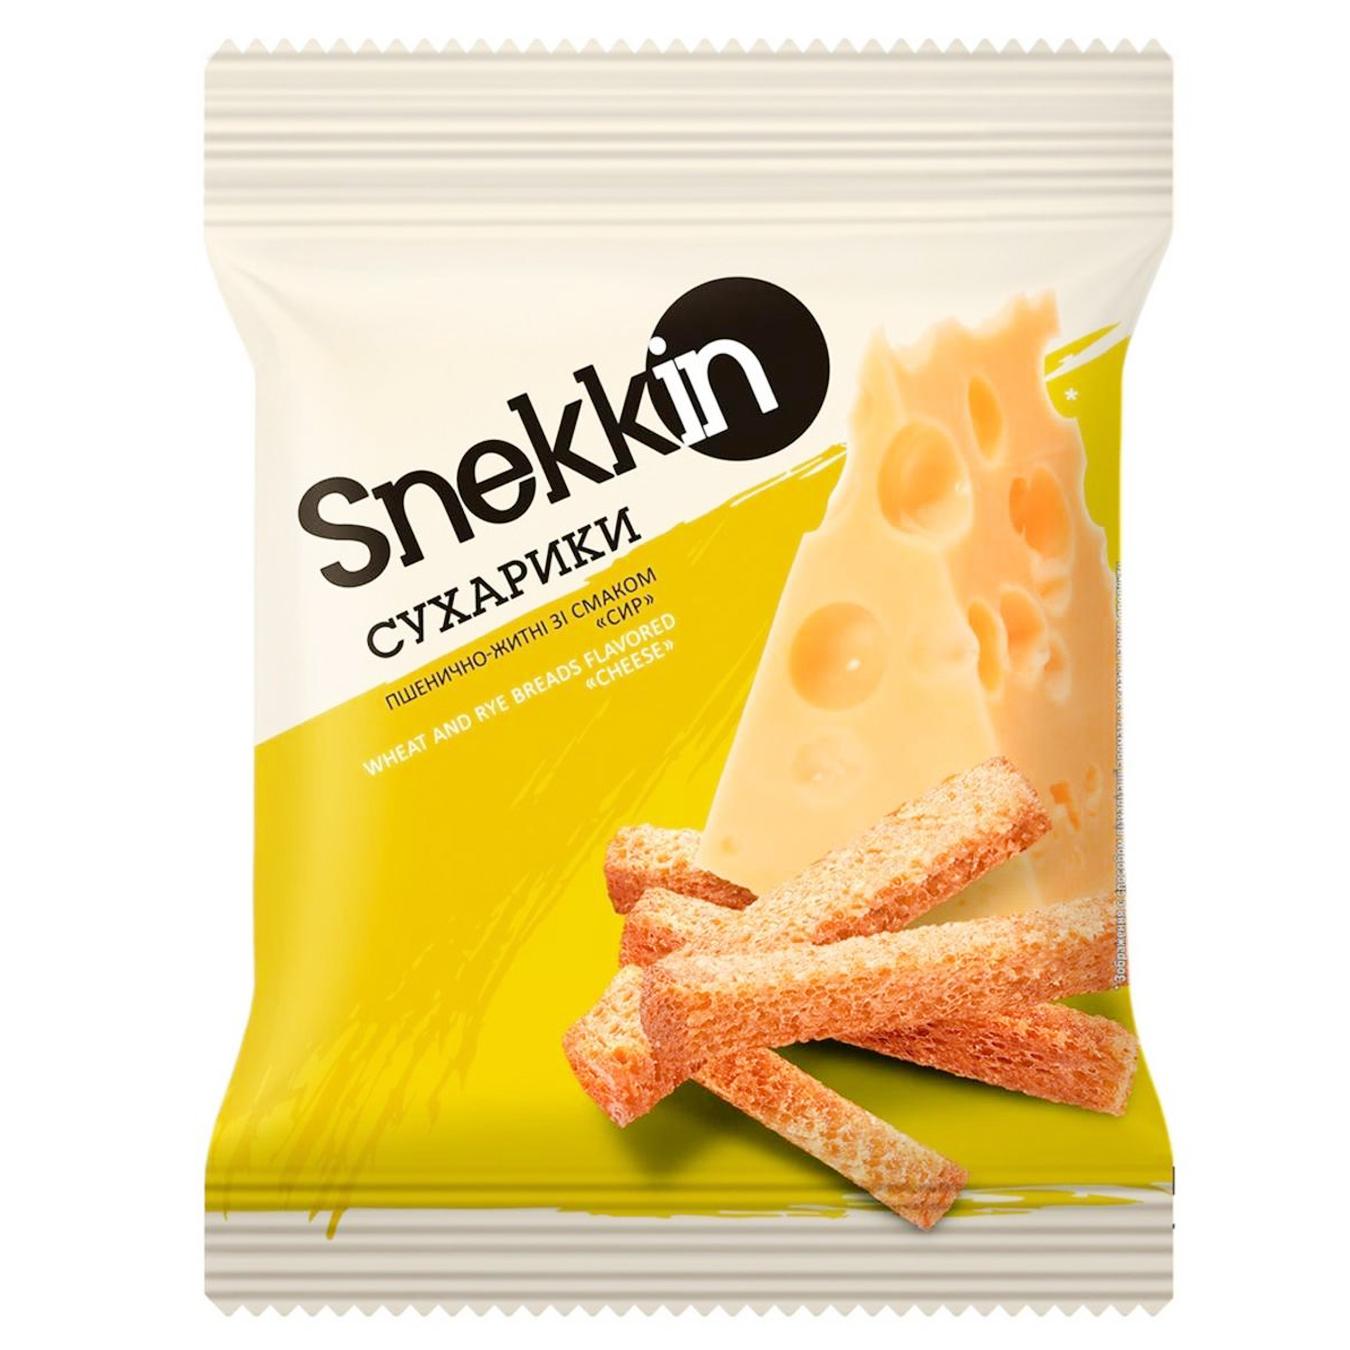 Snekkin wheat-rye crackers with a taste of cheese, a package of 70 g